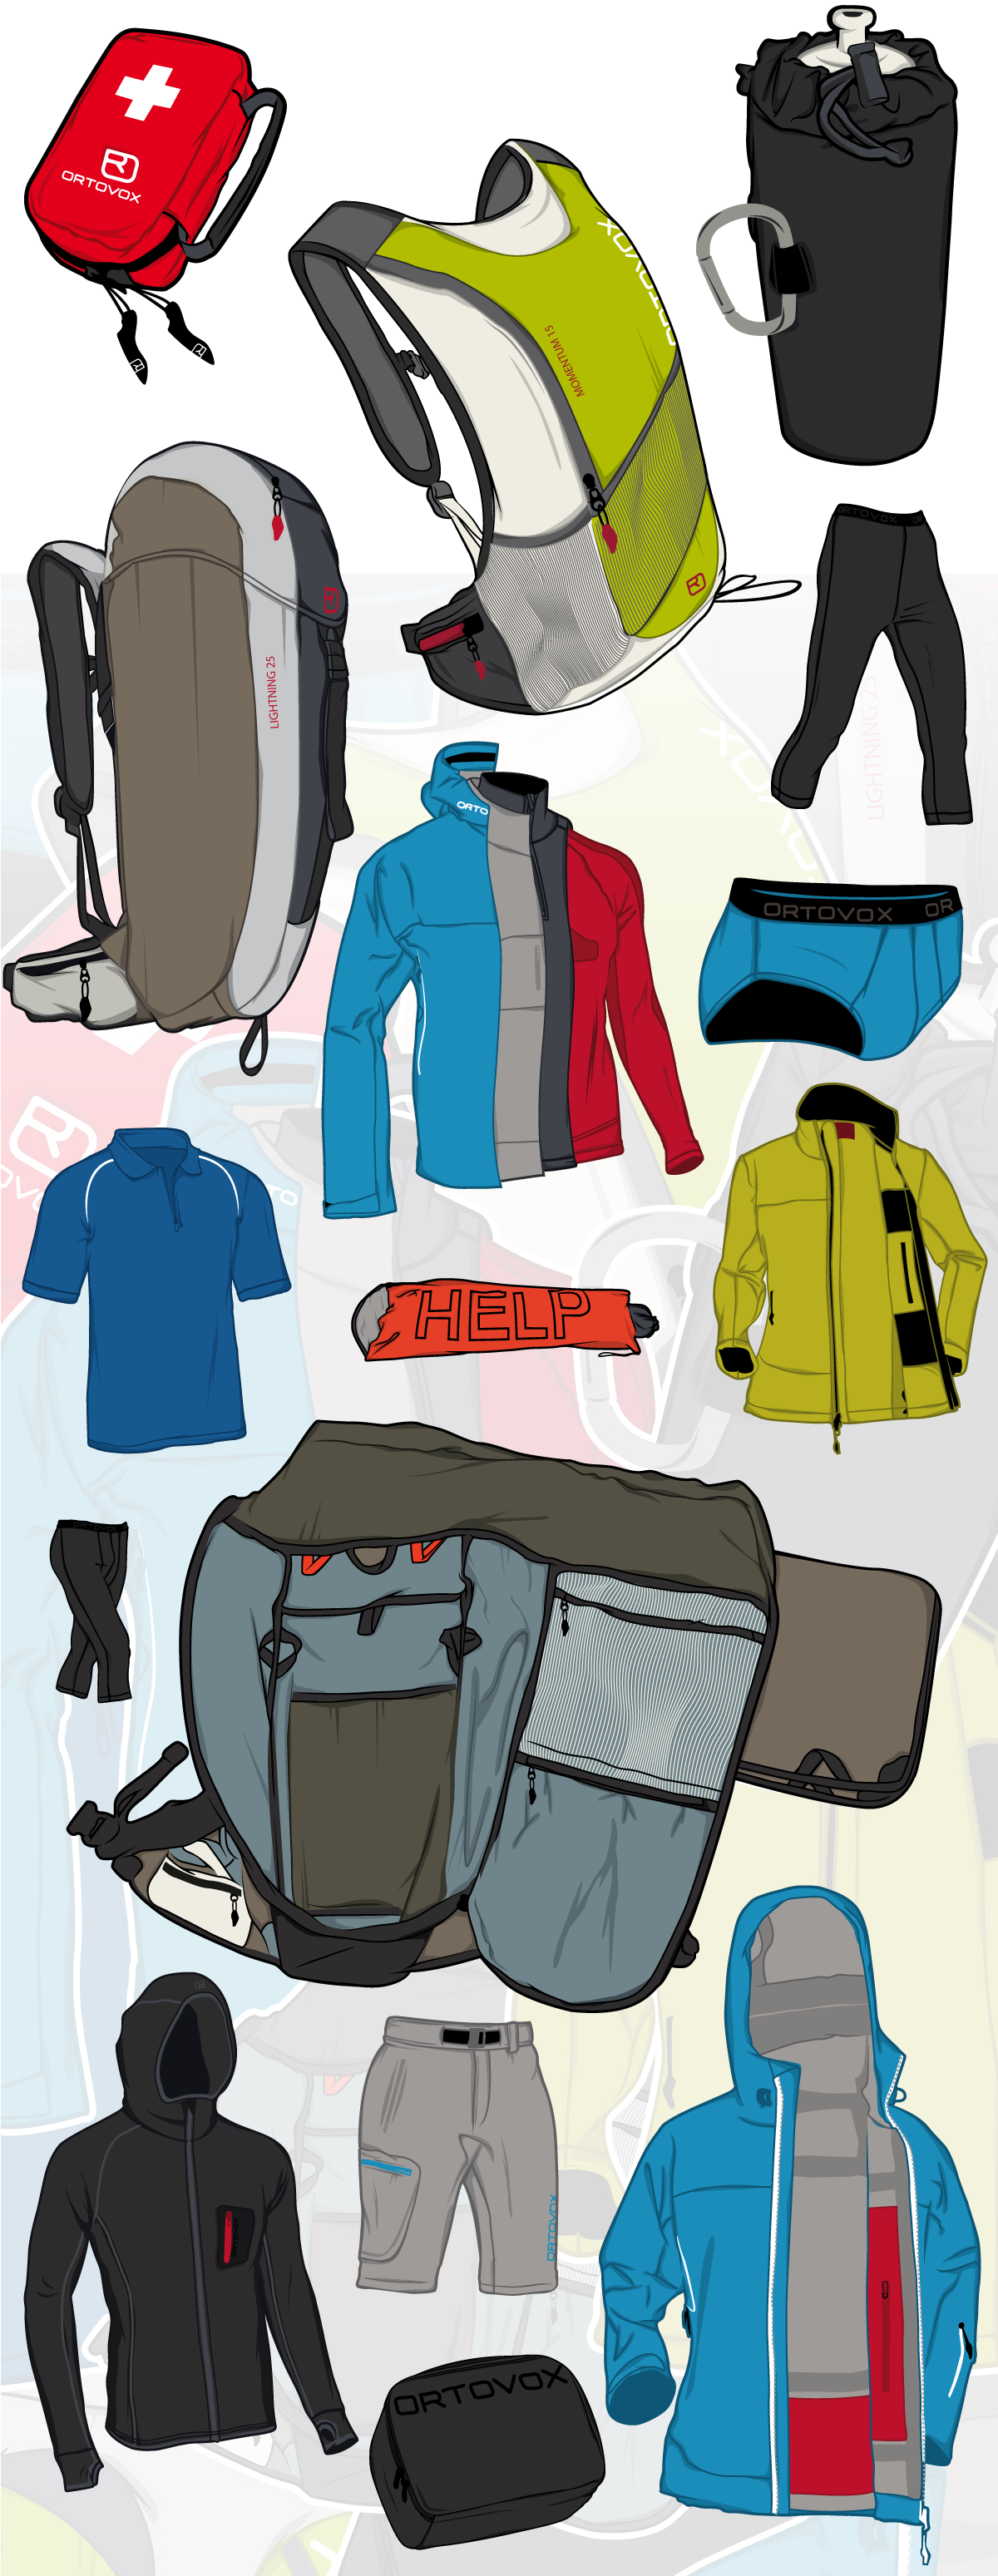 Ortovox backpack winter Gear workbook catalog bag Clothing commisioned summer mountaineering